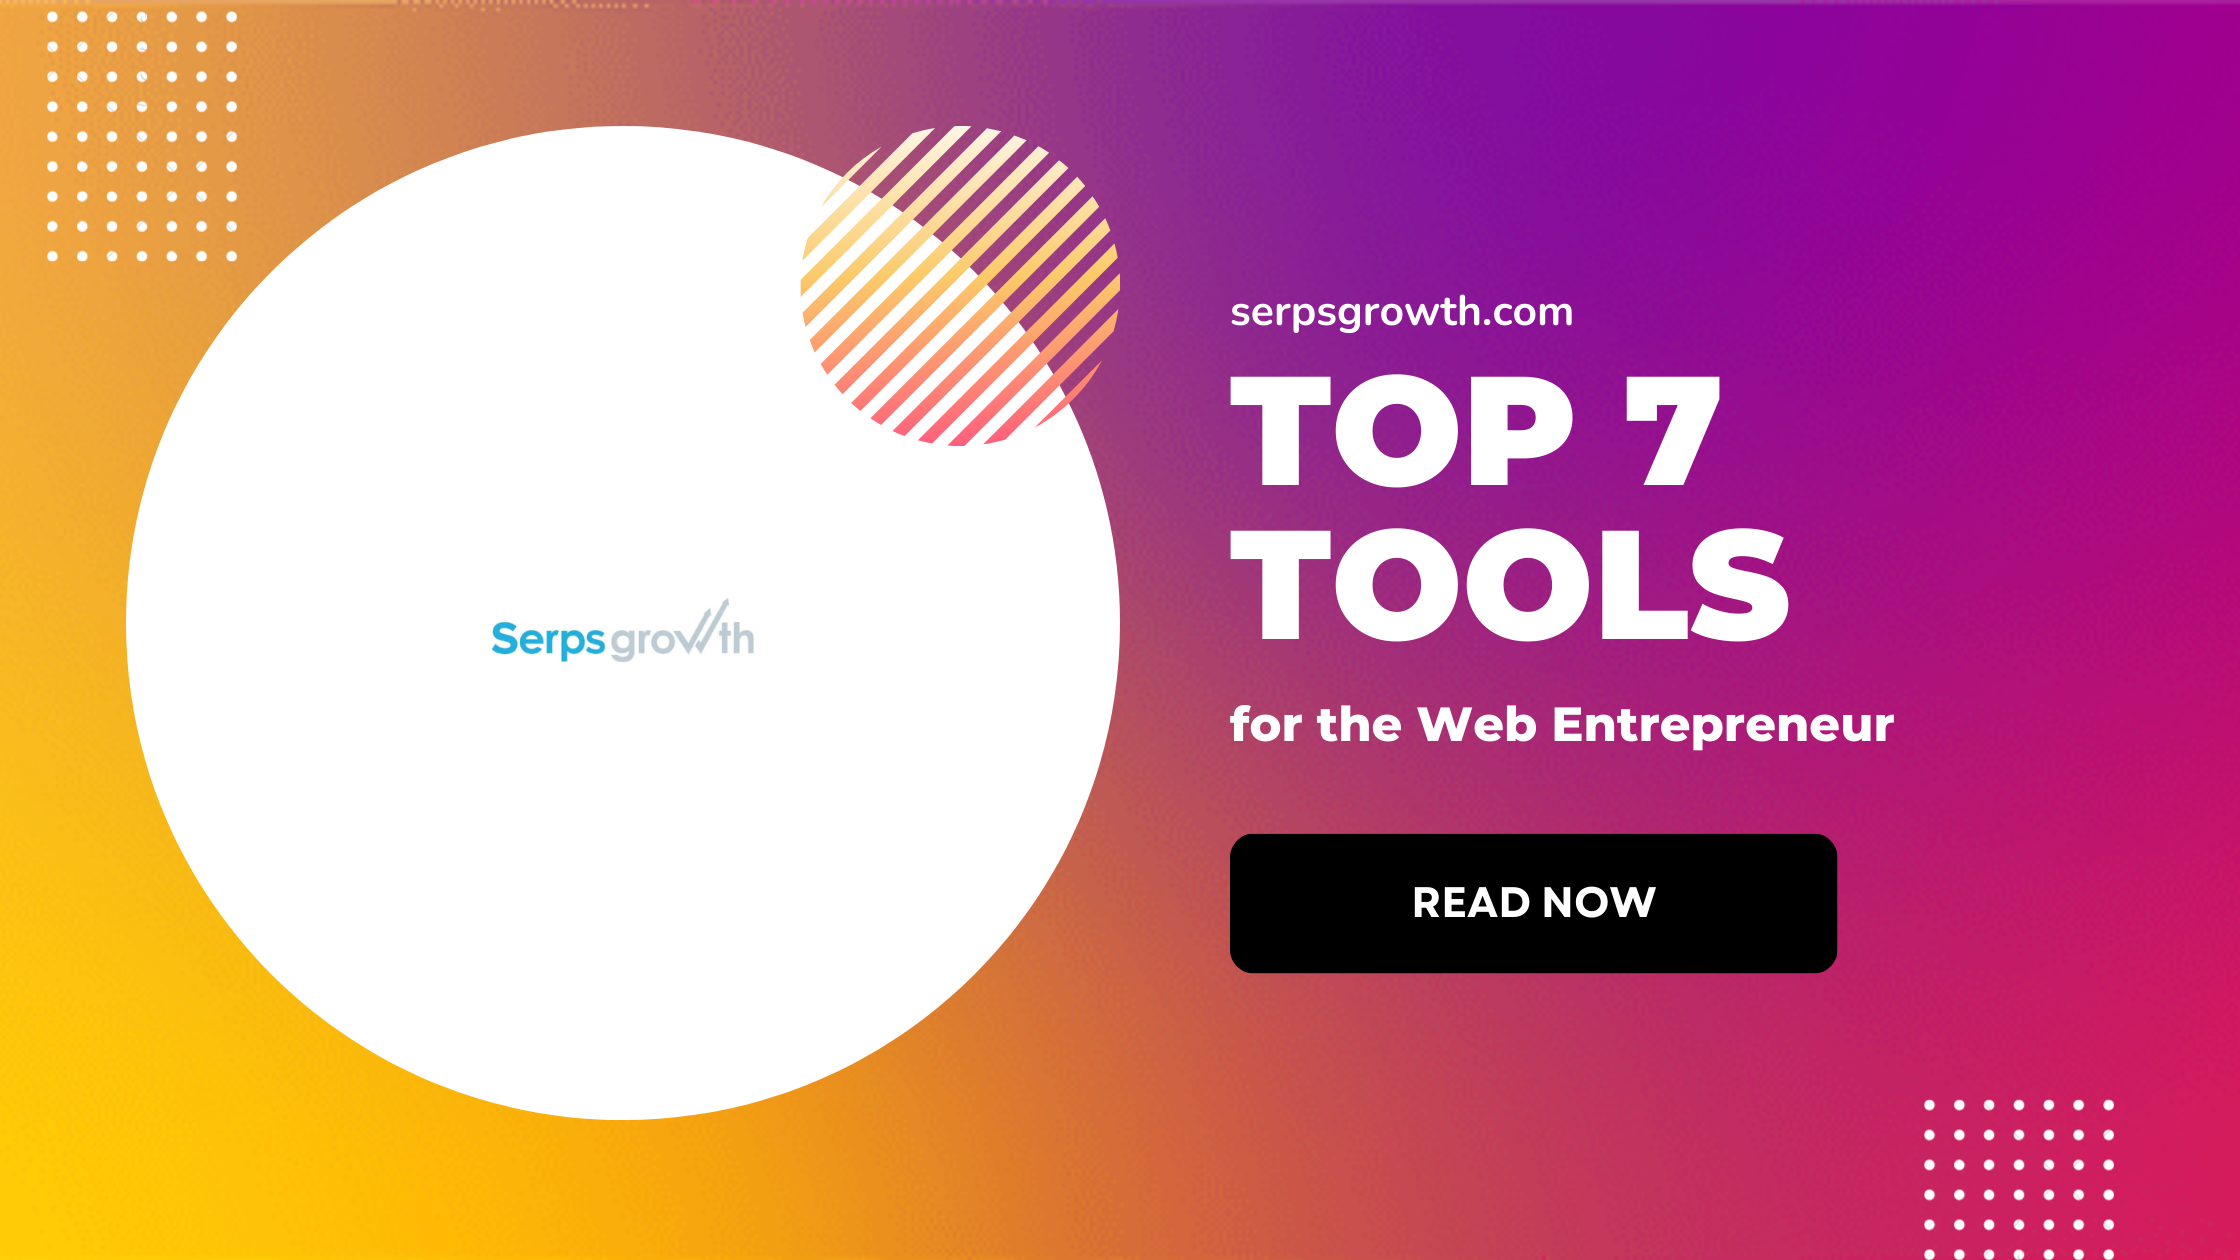 Top 7 Tools for the Web Entrepreneur